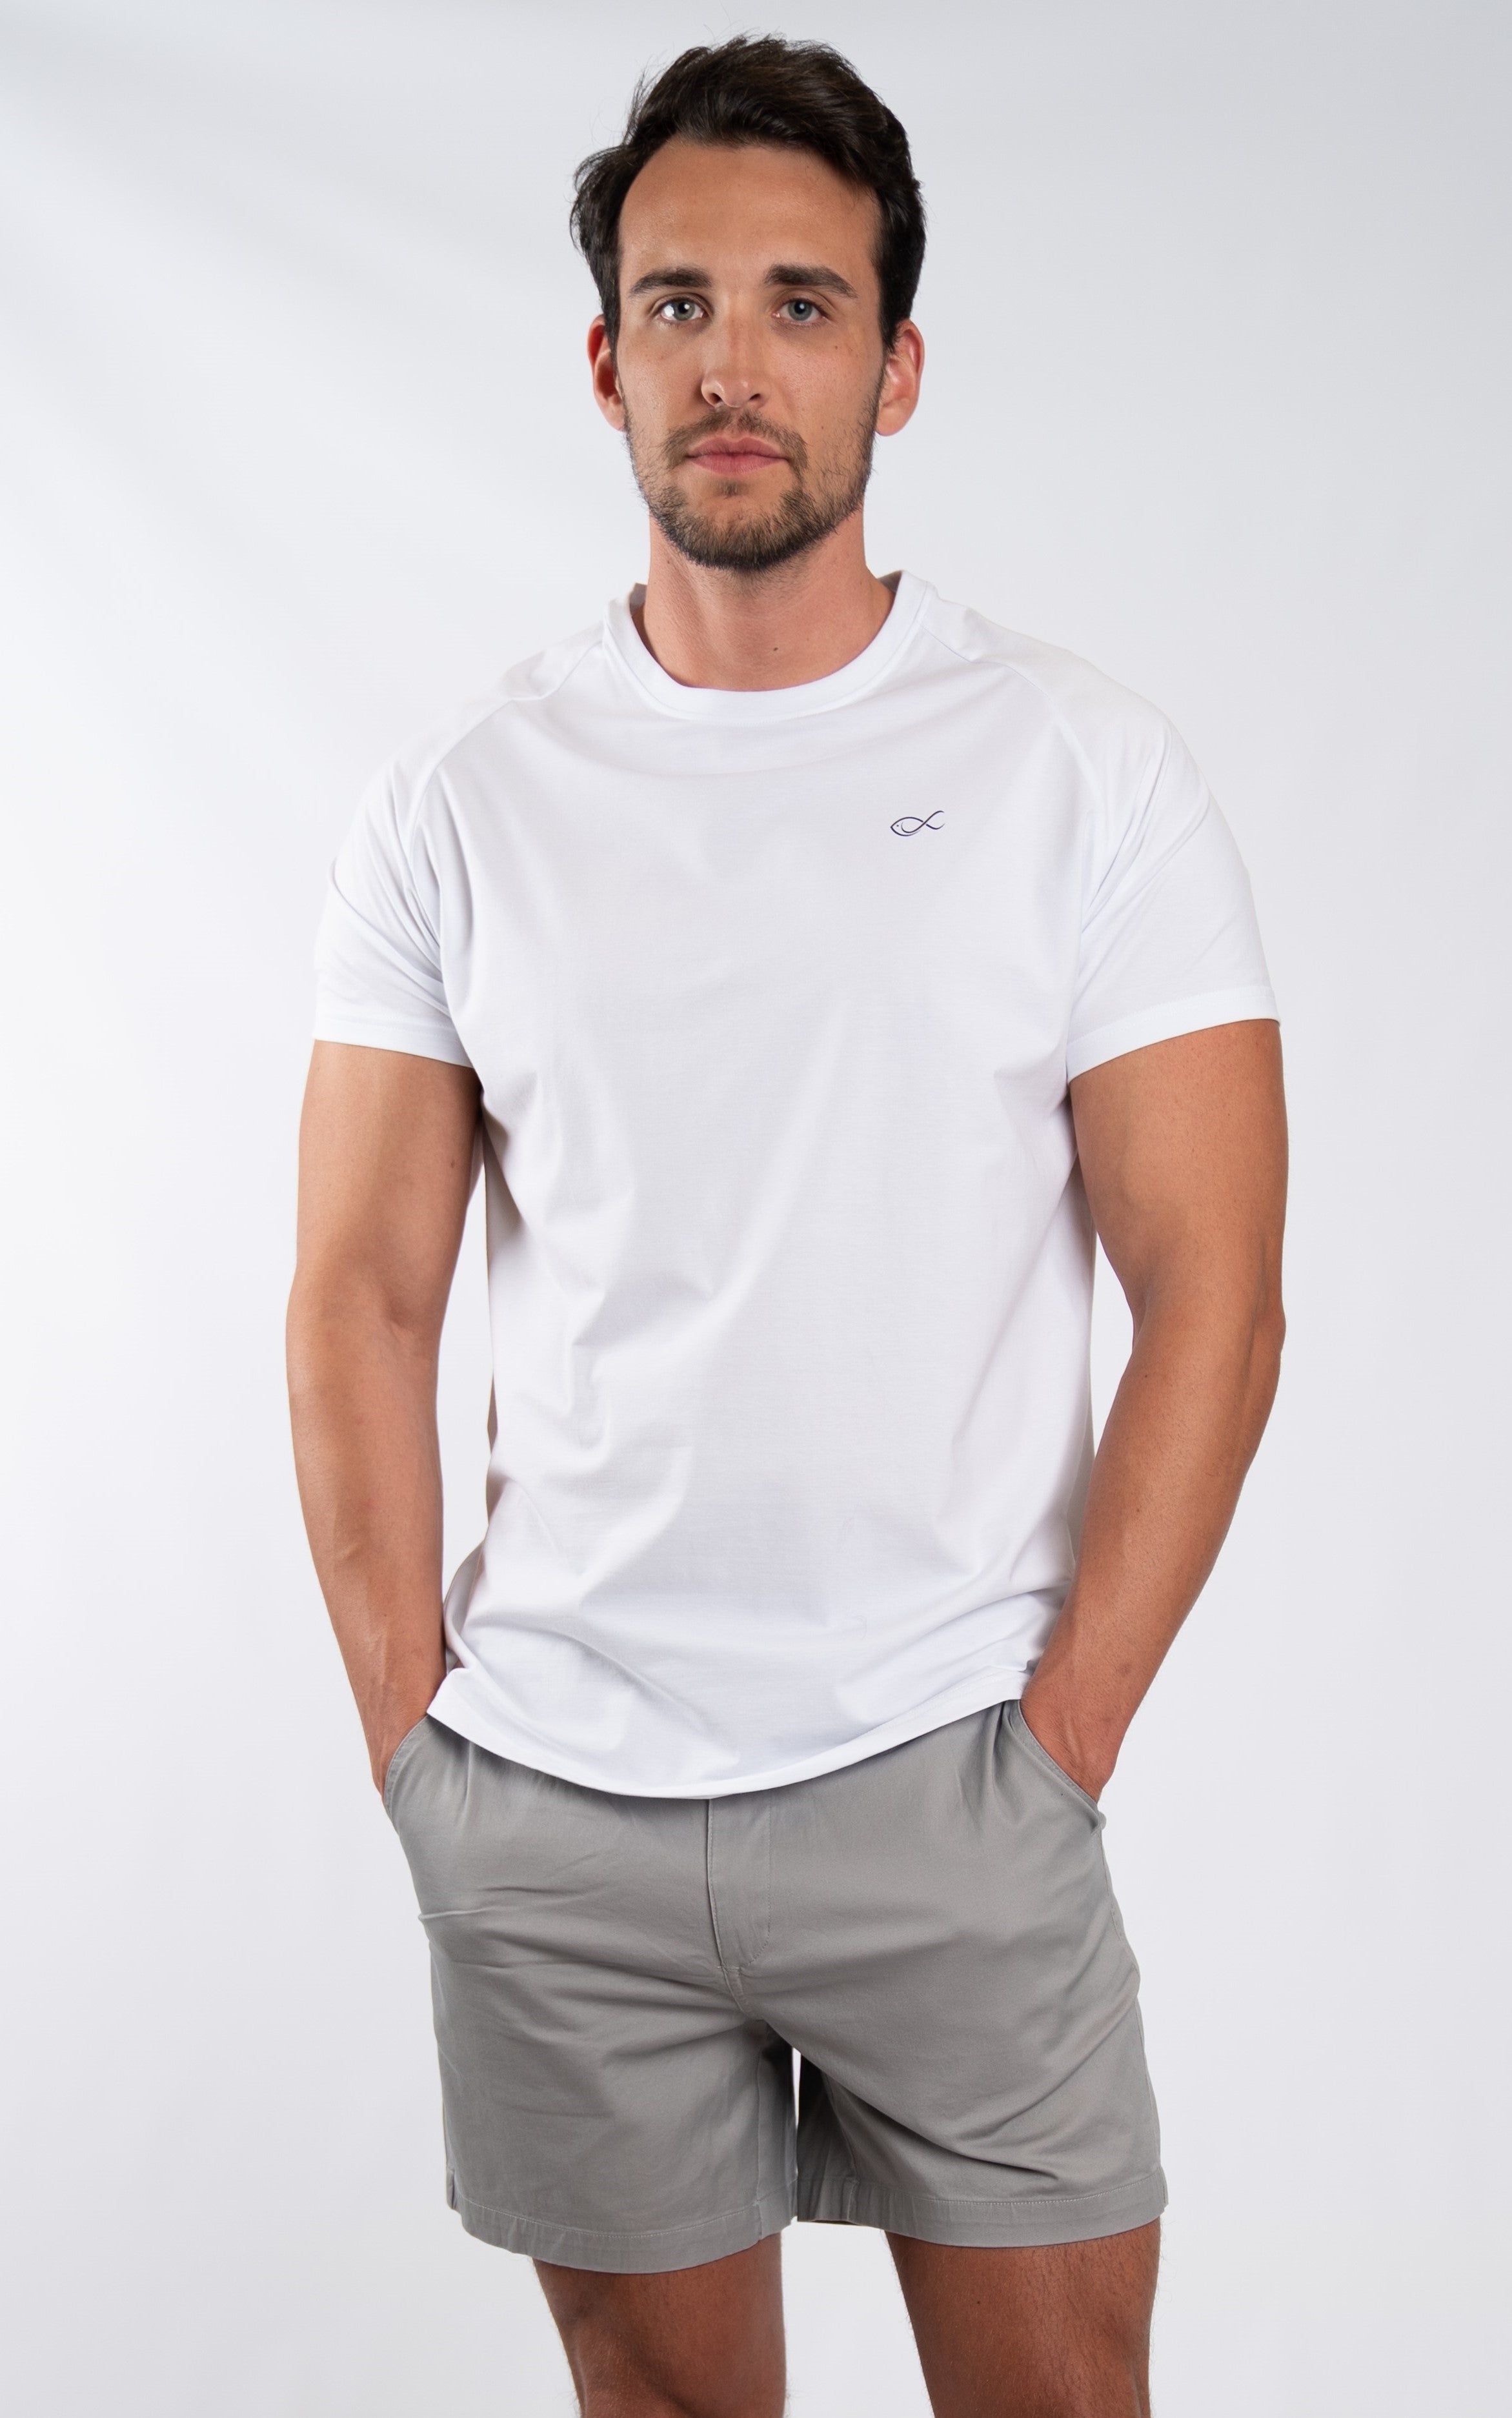 Men's Comfort Tee in White - Southern Athletica